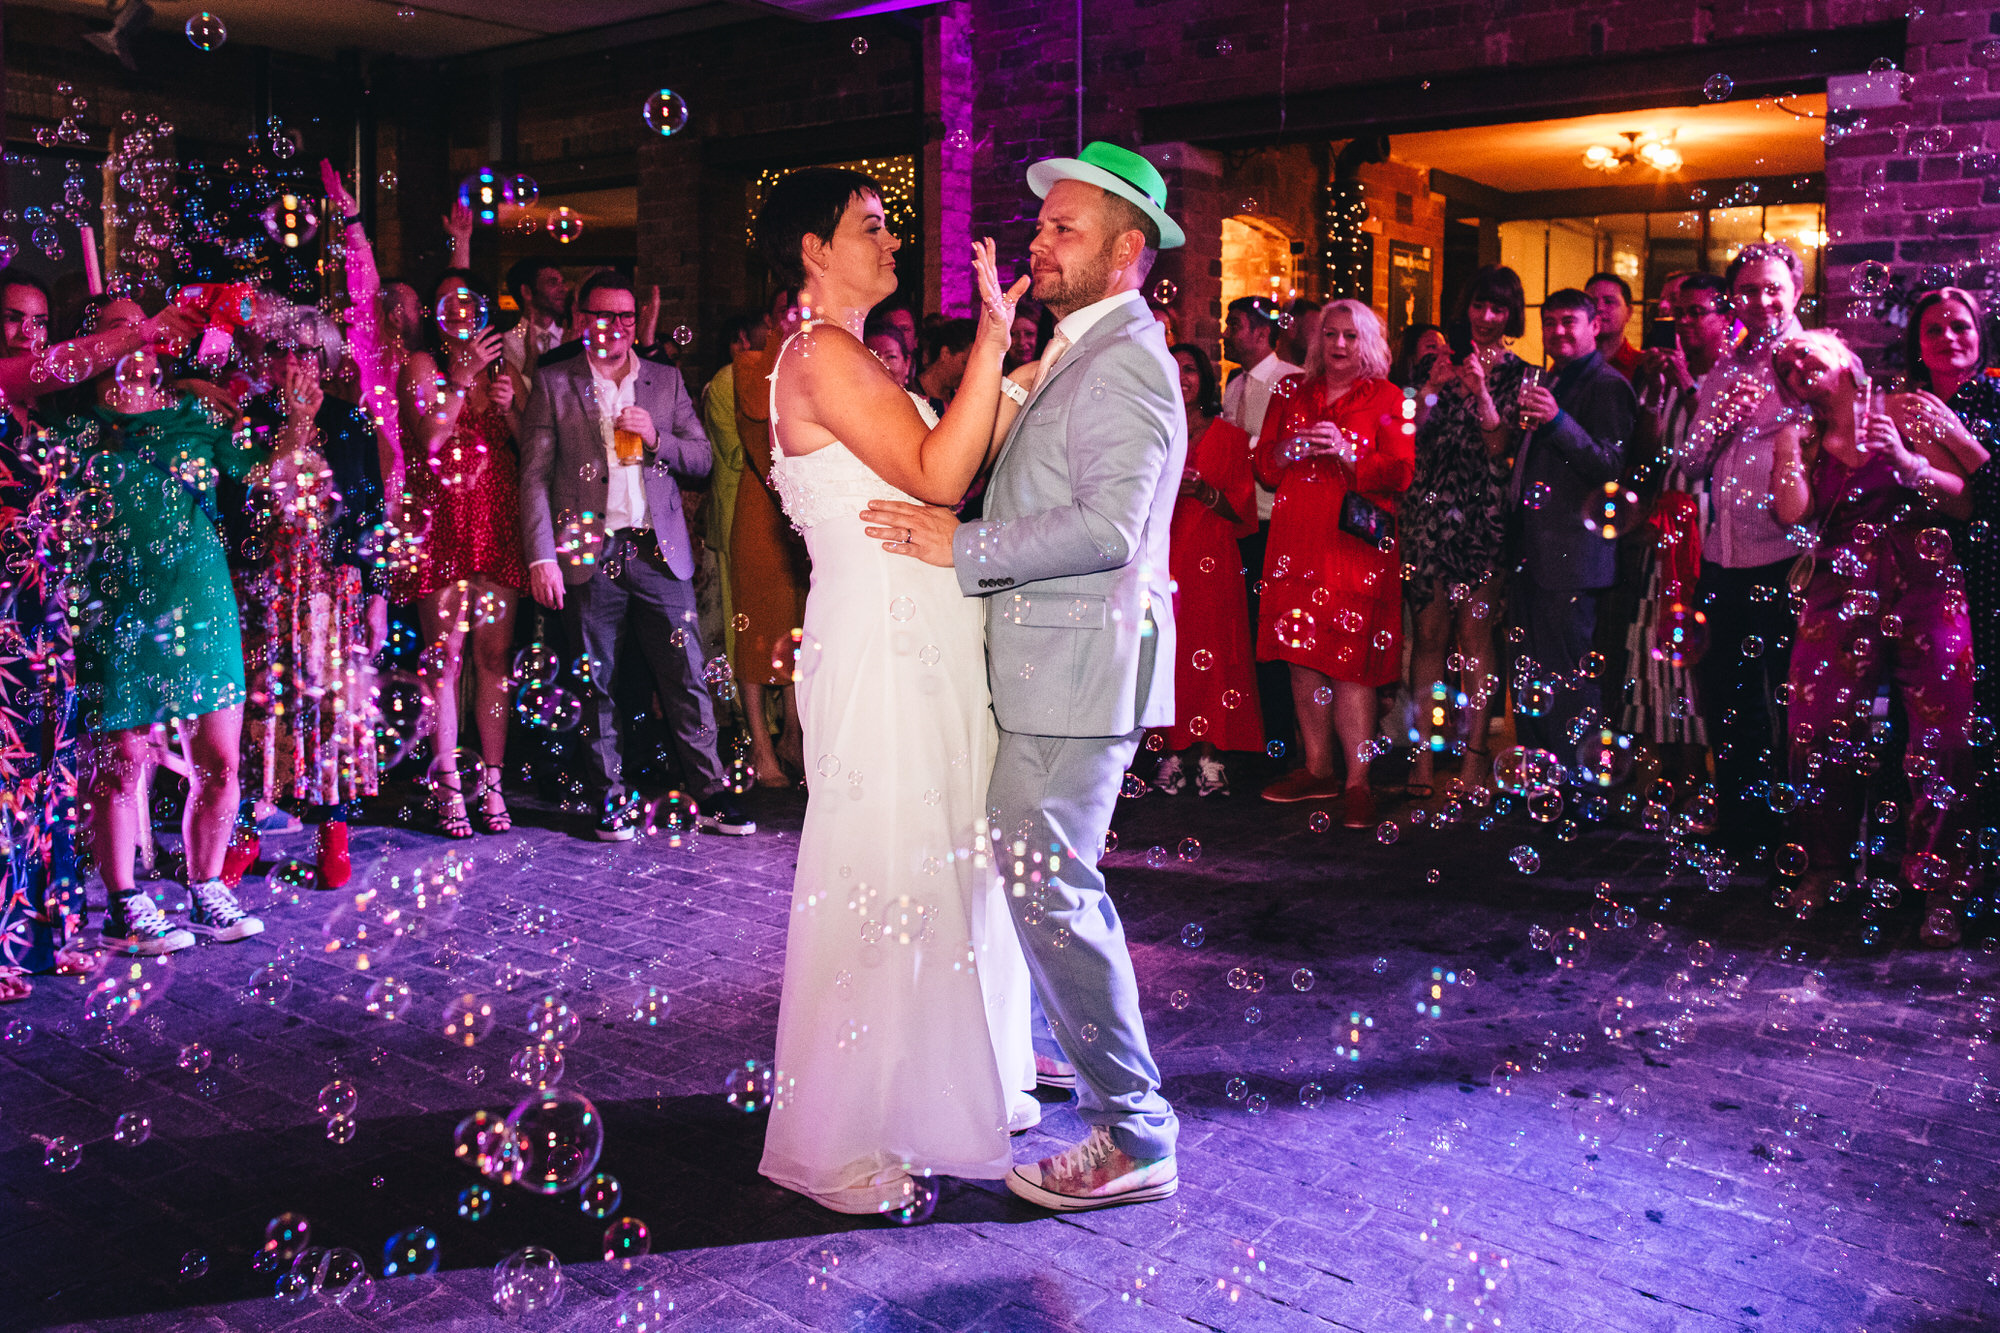 Iron house wedding first dance groom wears party bowlers hat the couple are surrounded by bubbles